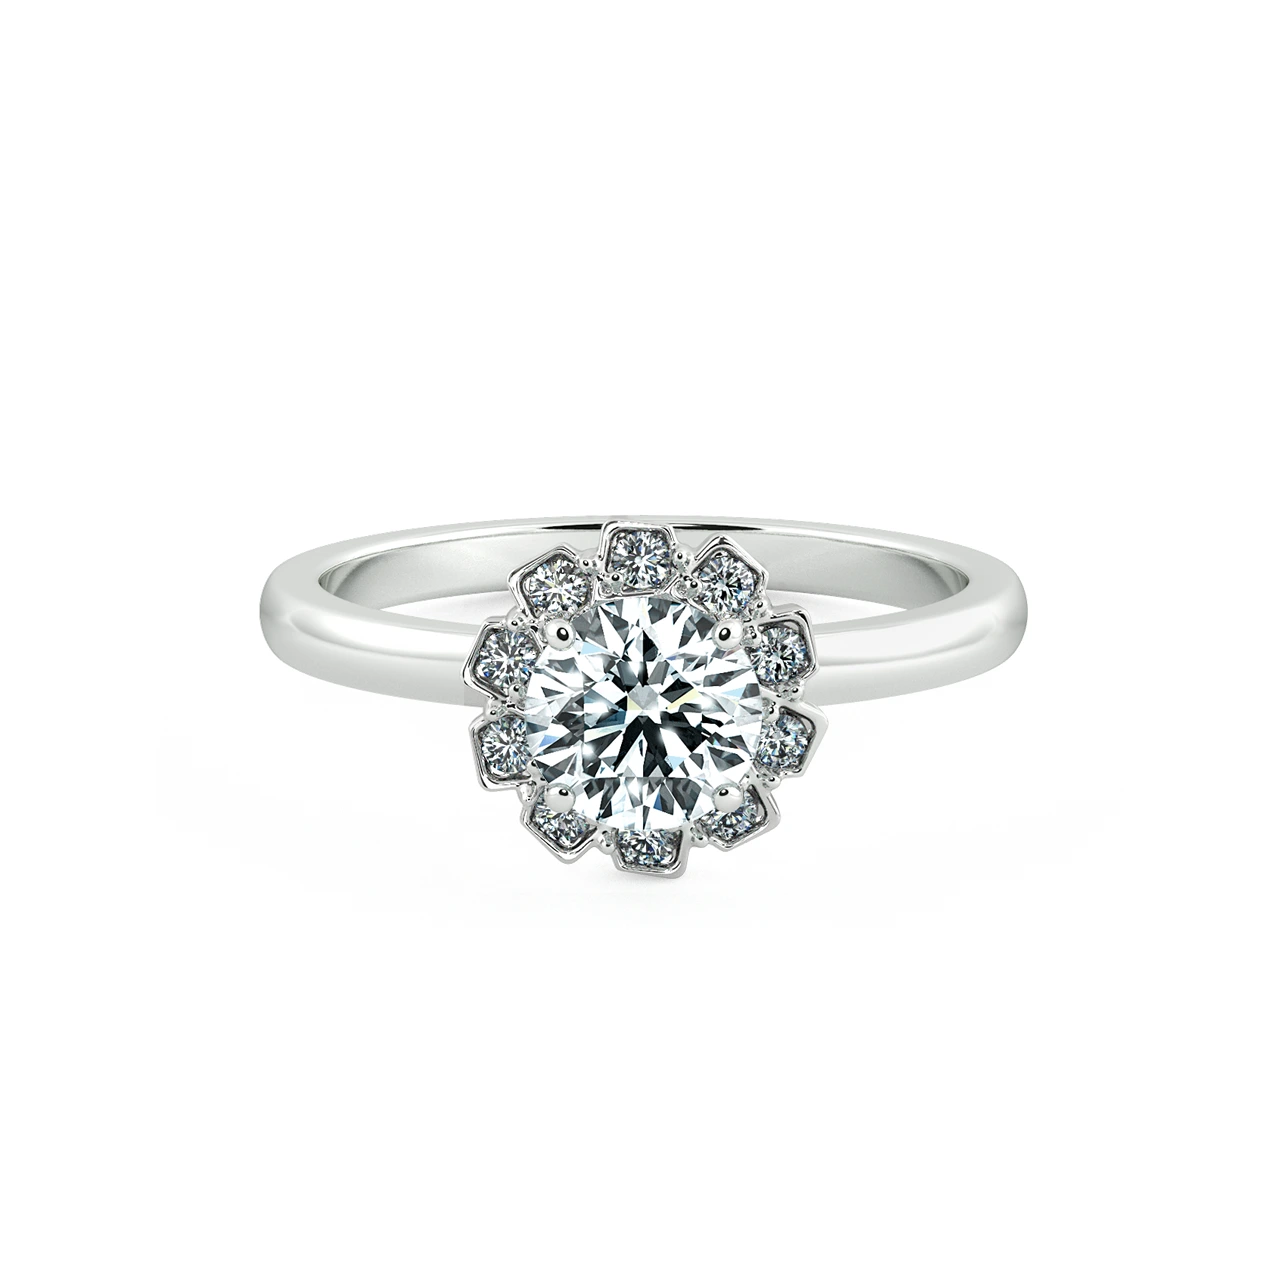 Single Halo Engagement Ring with Stylized NCH2106 1